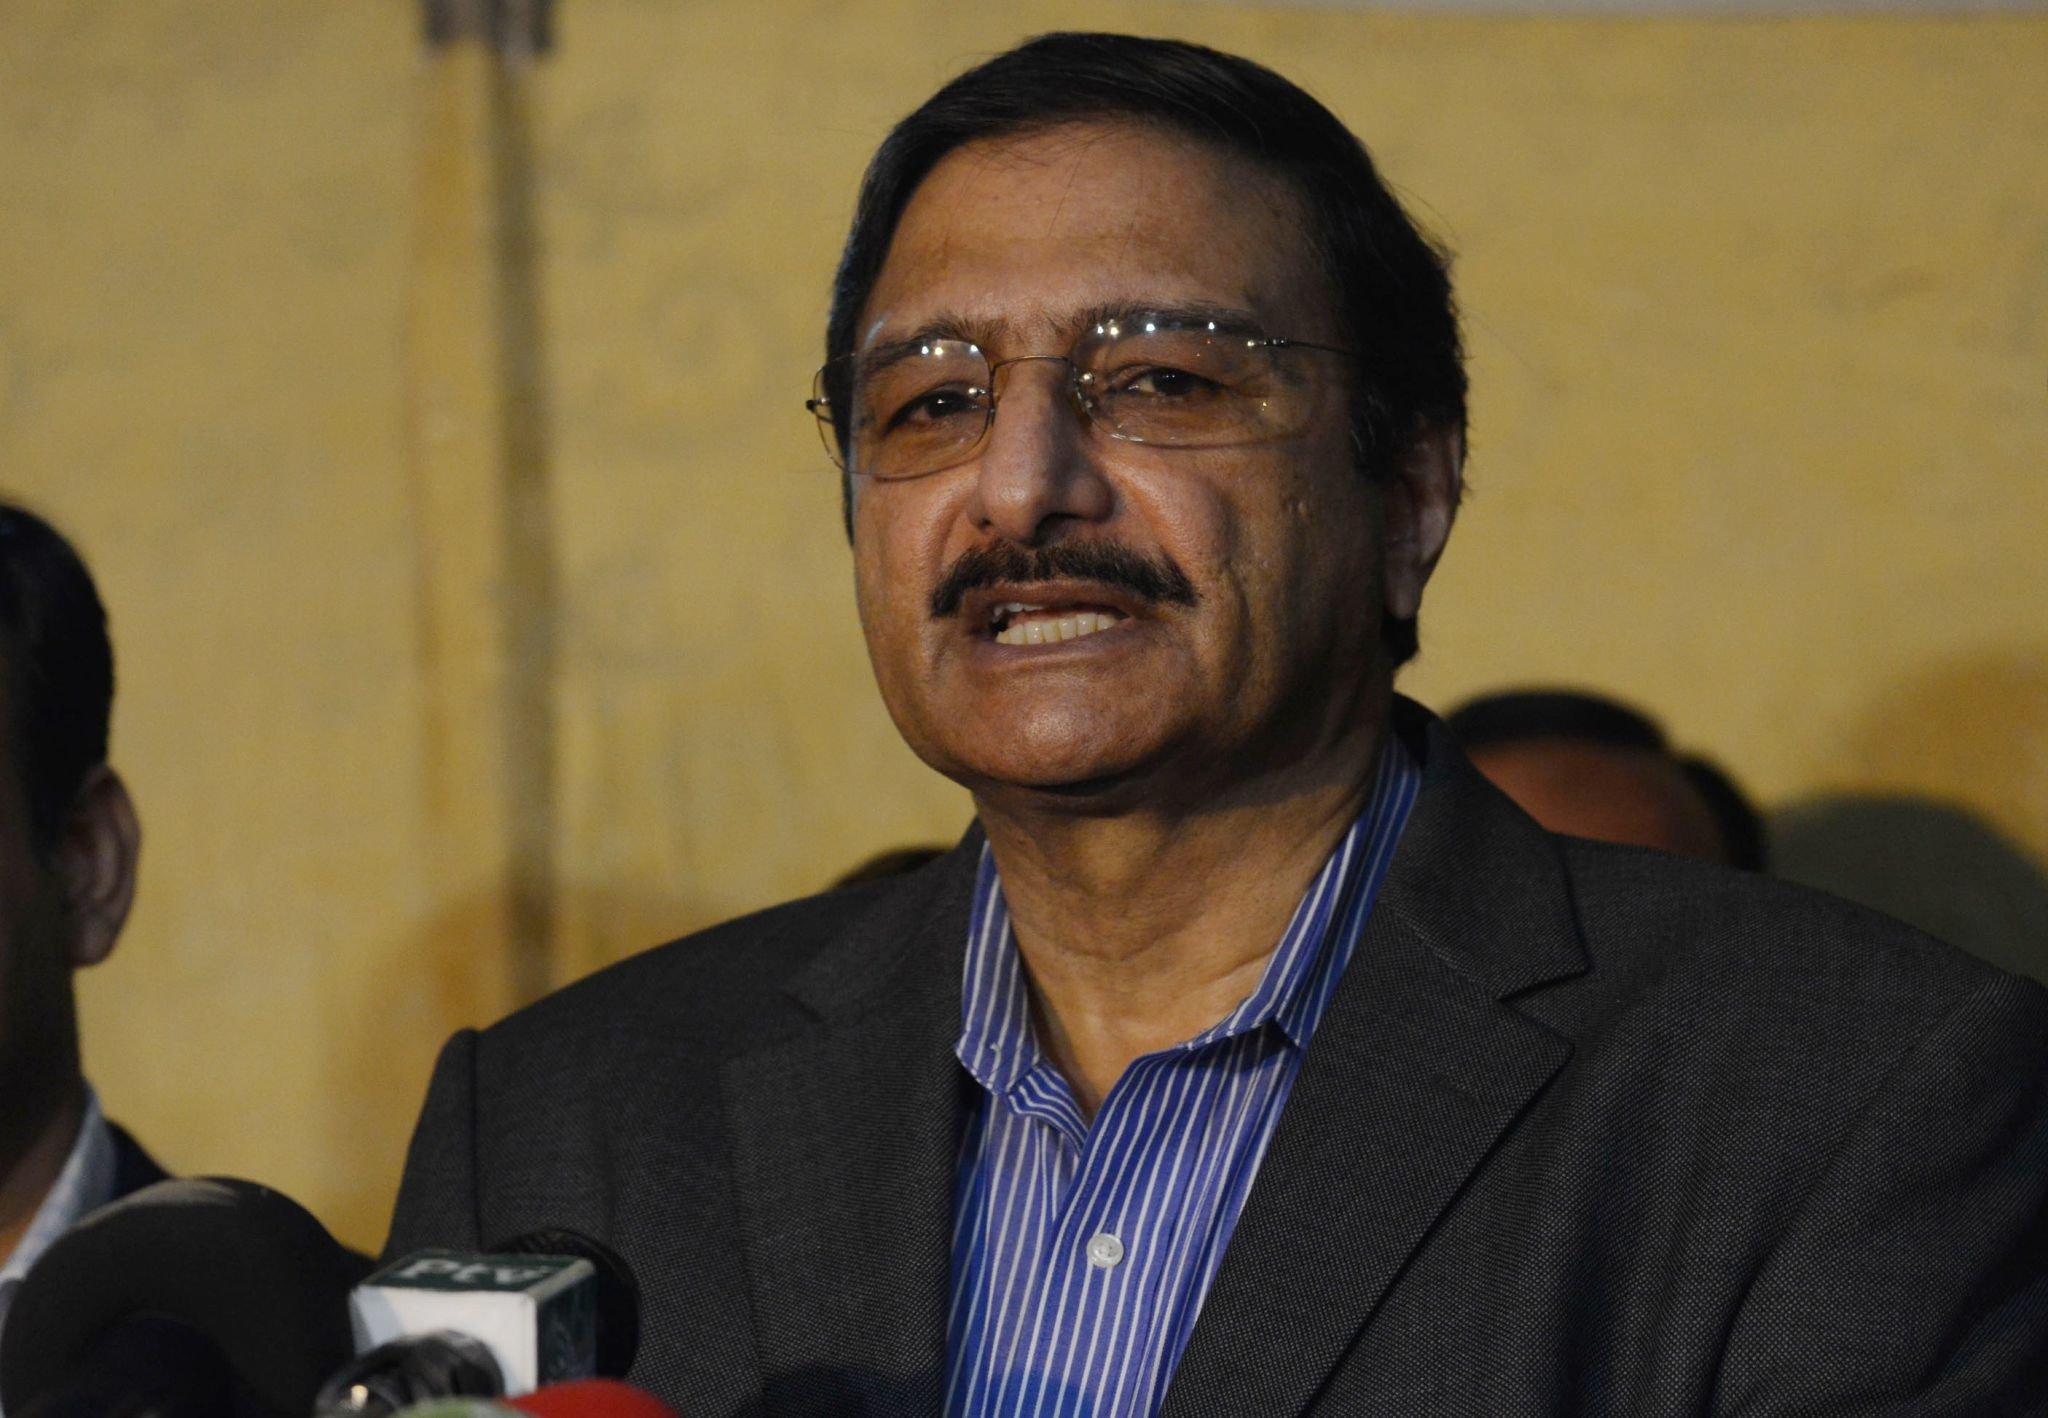 New Controversy Emerges from Zaka Ashraf Leaked Conversation